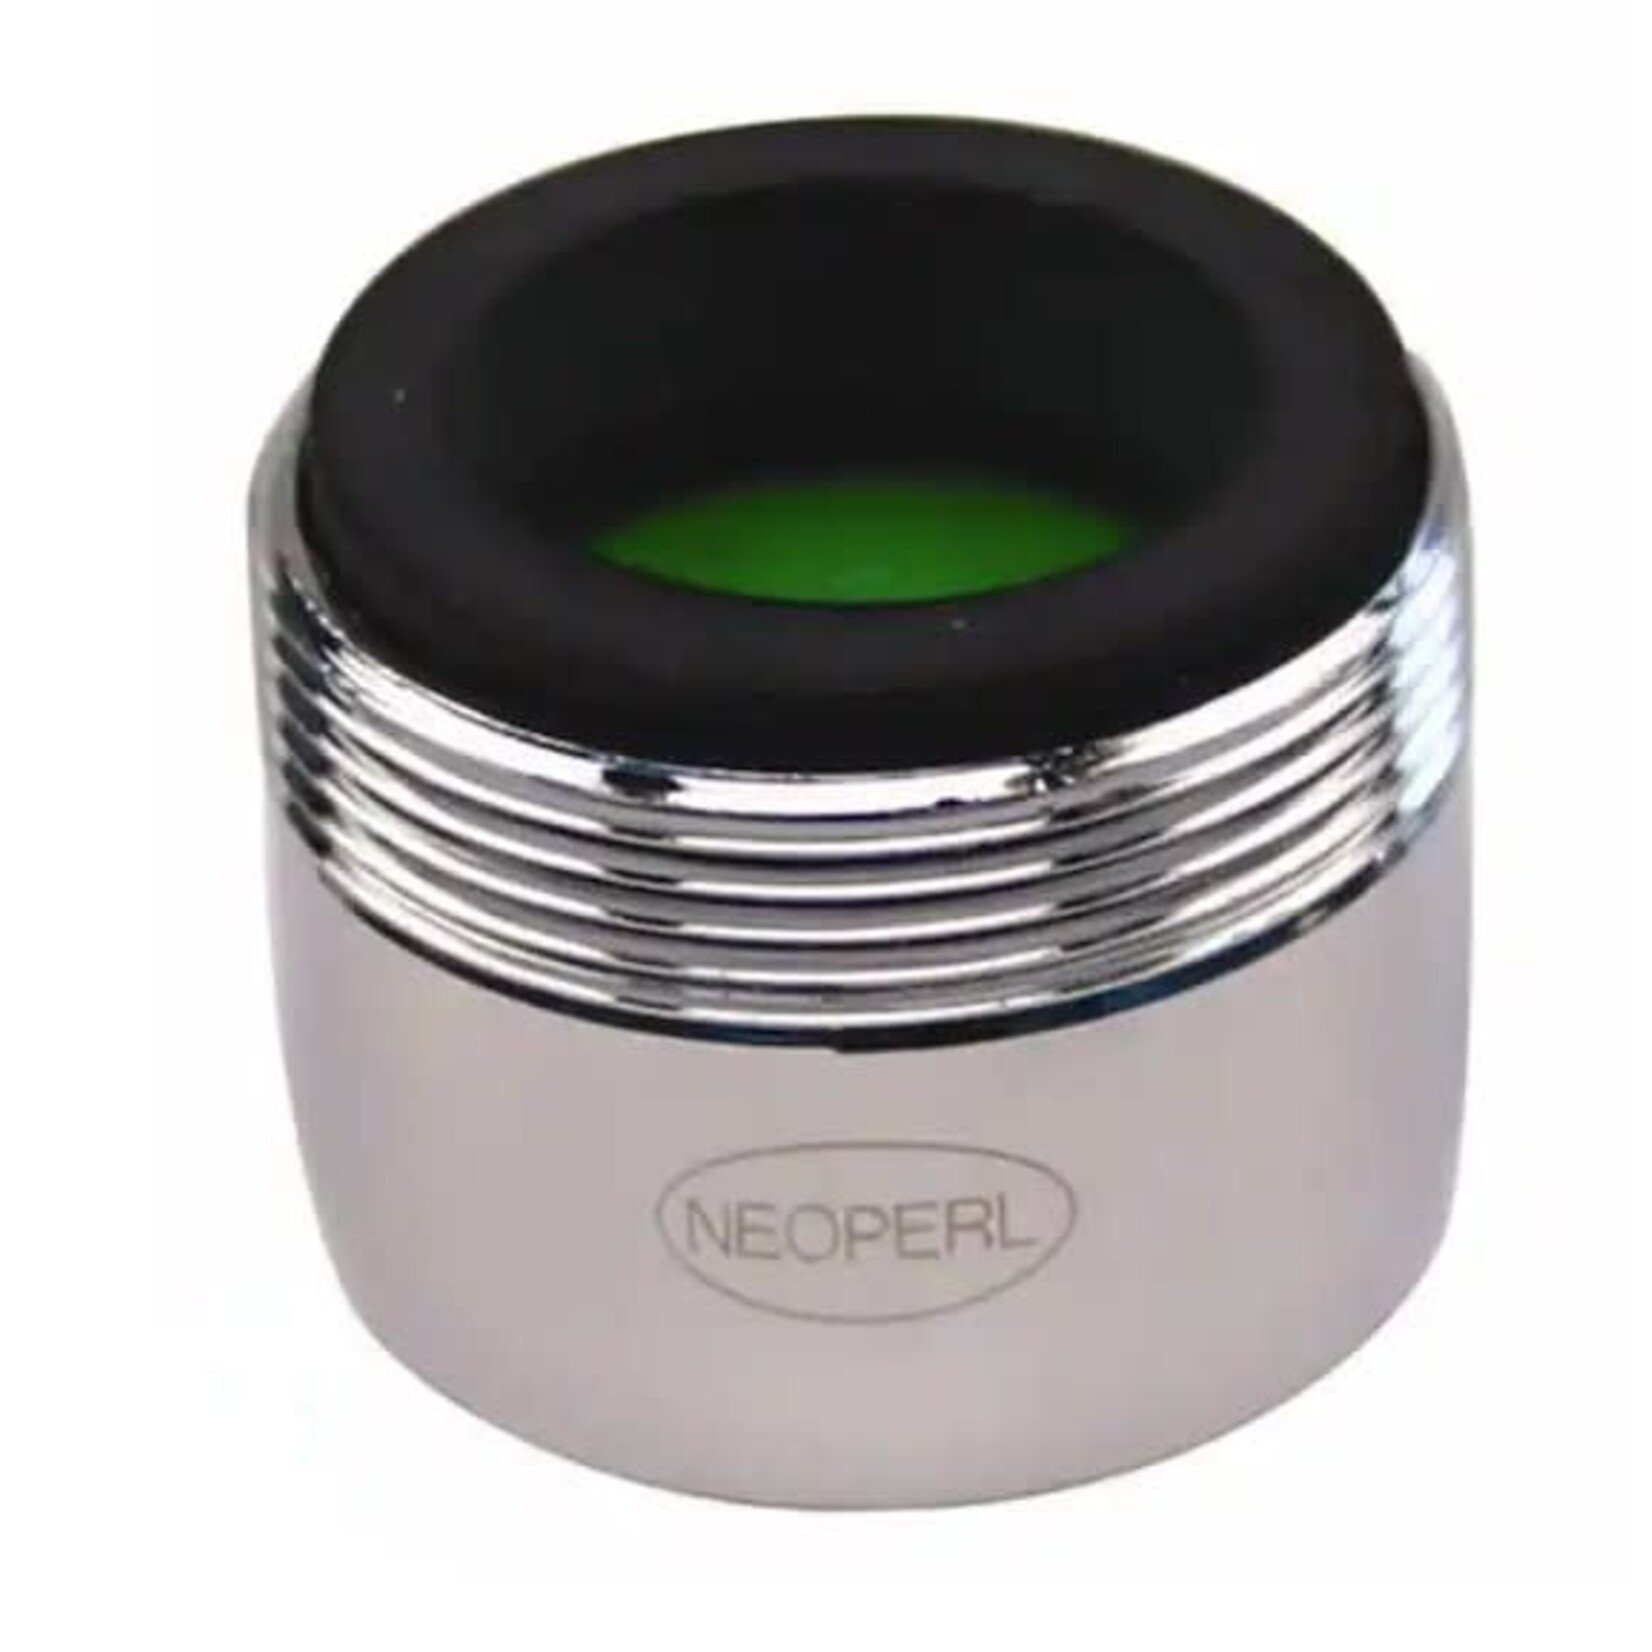 NEOPERL NEOPERL FAUCET AERATOR 1.5 GPM DUAL THREAD 15 16 - 27